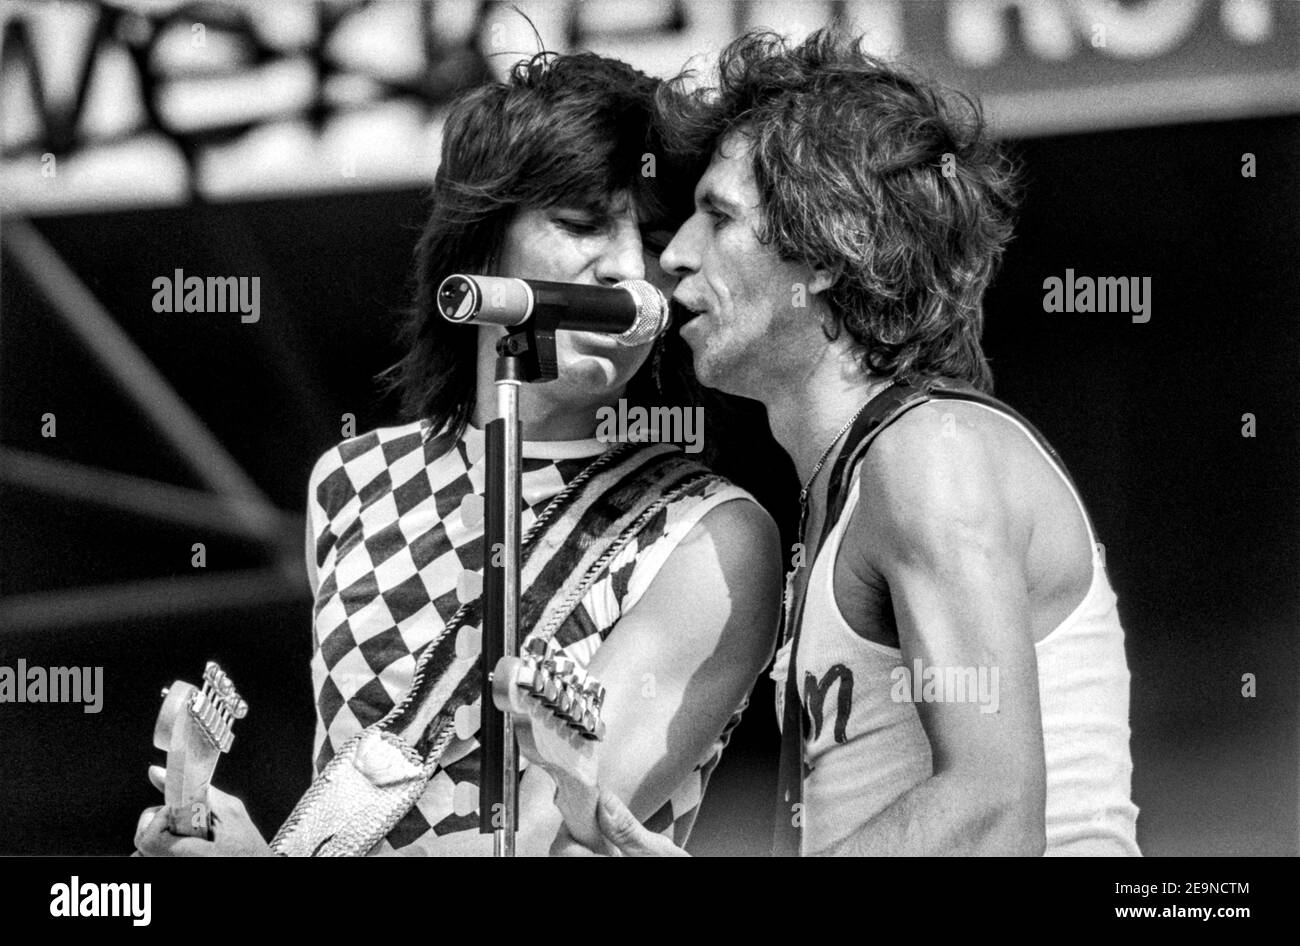 ROTTERDAM, THE NETHERLANDS - JUN 02, 1982:  Guitar players Keith Richards and Ron Wood from The Rolling Stones during their concert in de kuip stadium Stock Photo